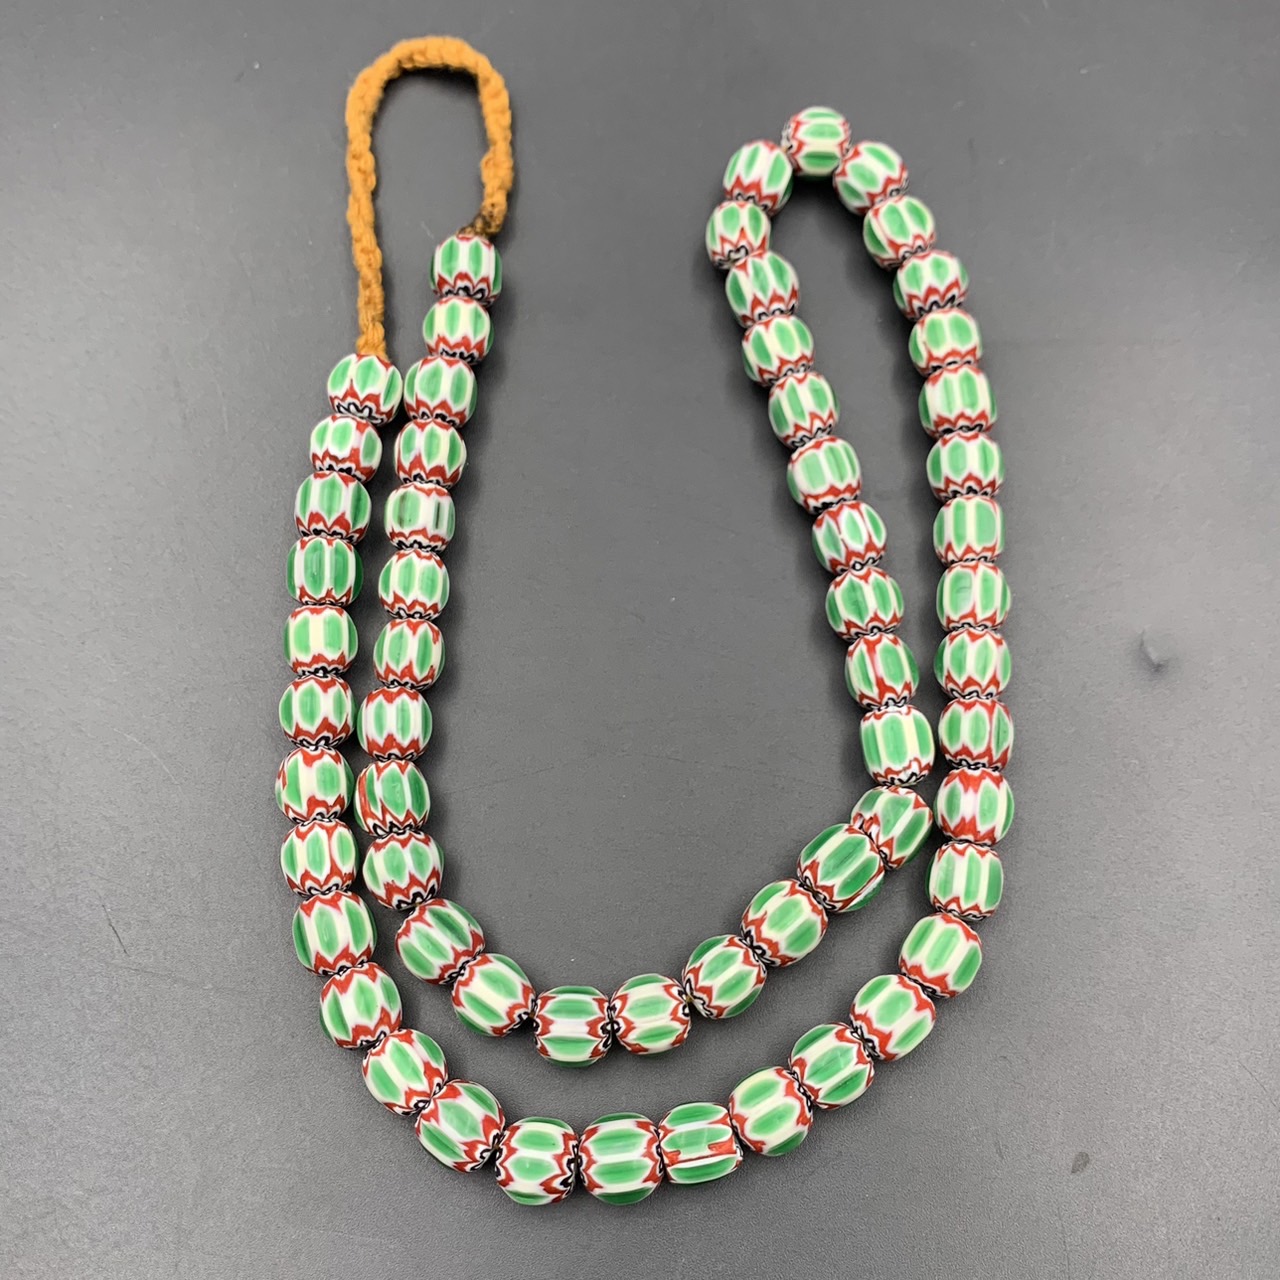 Wonderful Green Vintage Chevron Trade African Glass Beads Strand, LPBR-0322 - Image 2 of 8